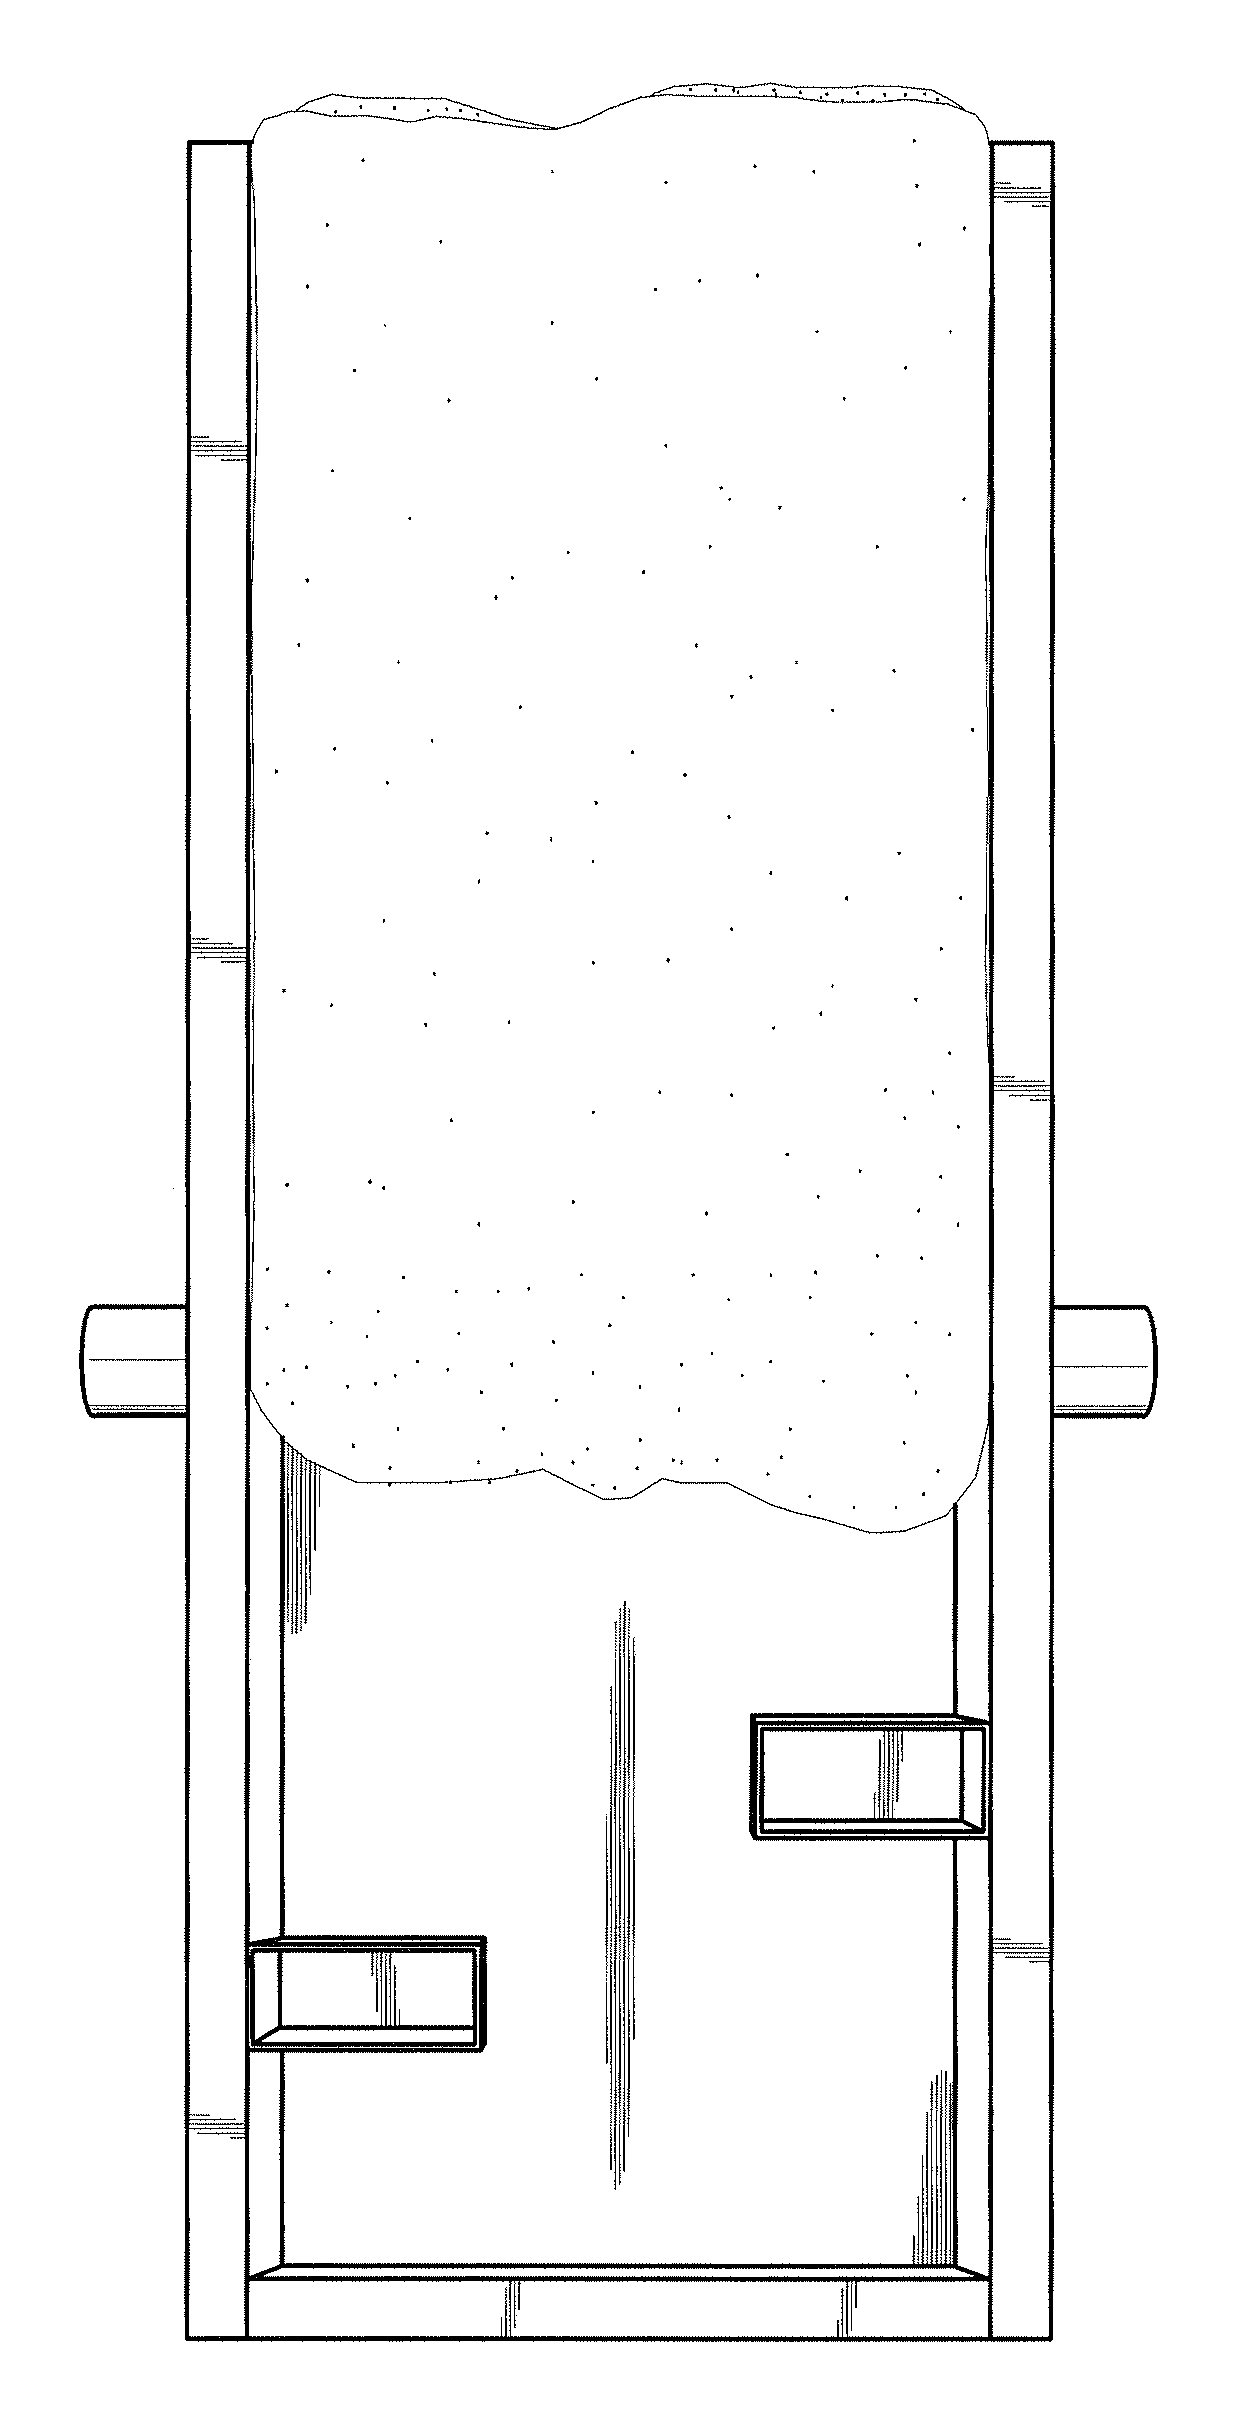 Method for filling wall cavities with expanding foam insulation